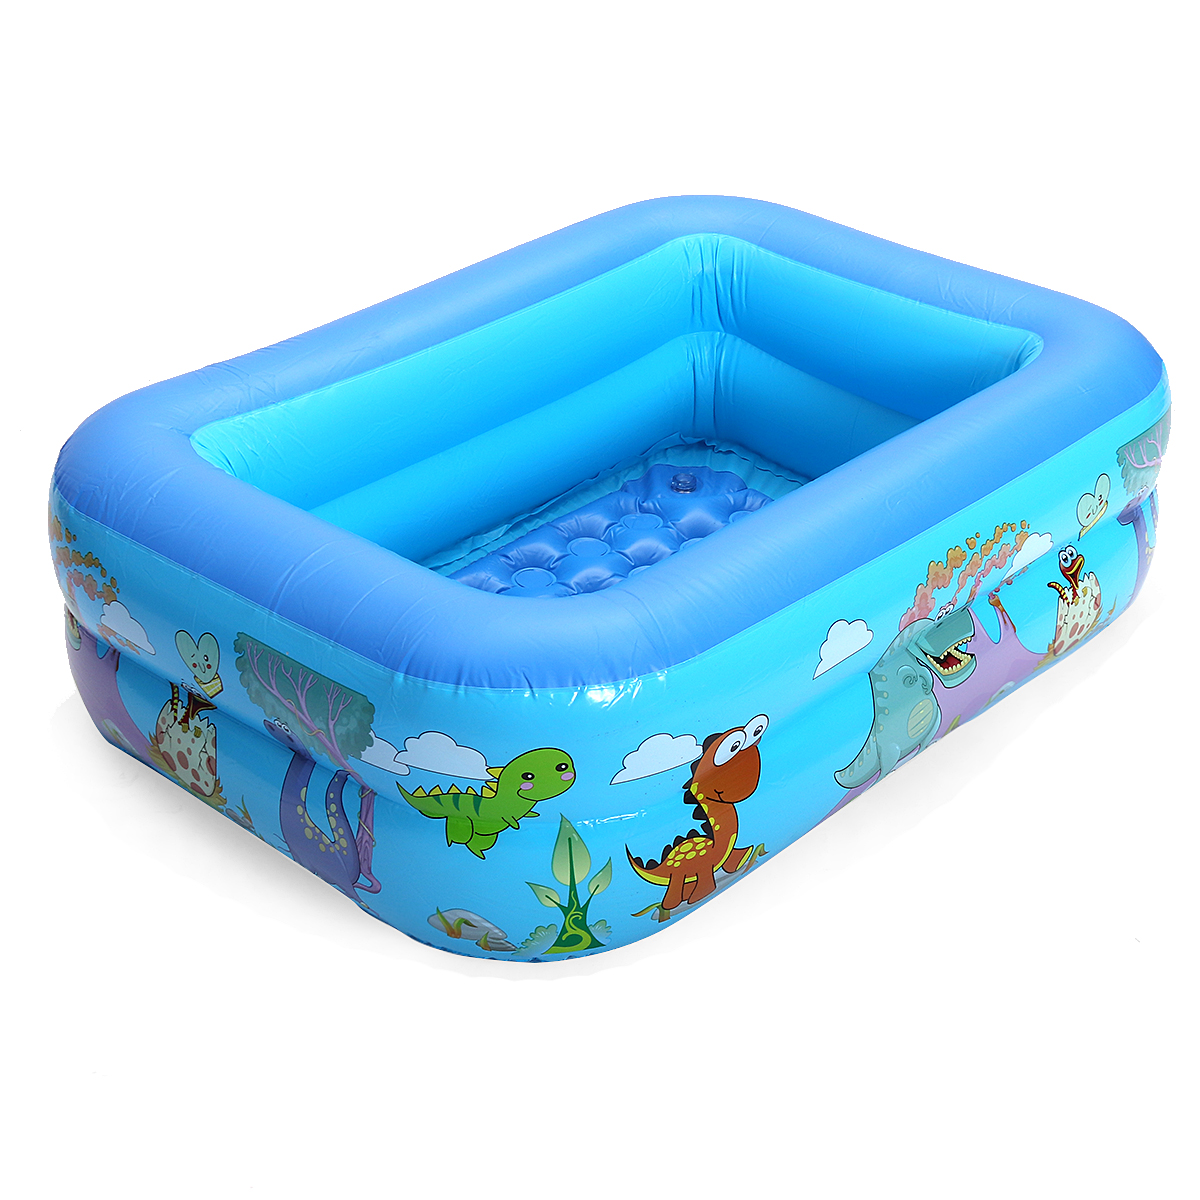 120130150cm-Inflatable-Swimming-Pool-Family-Bathing-Tub-Playing-Pool-Outdoor-Indoor-Garden-1813649-2